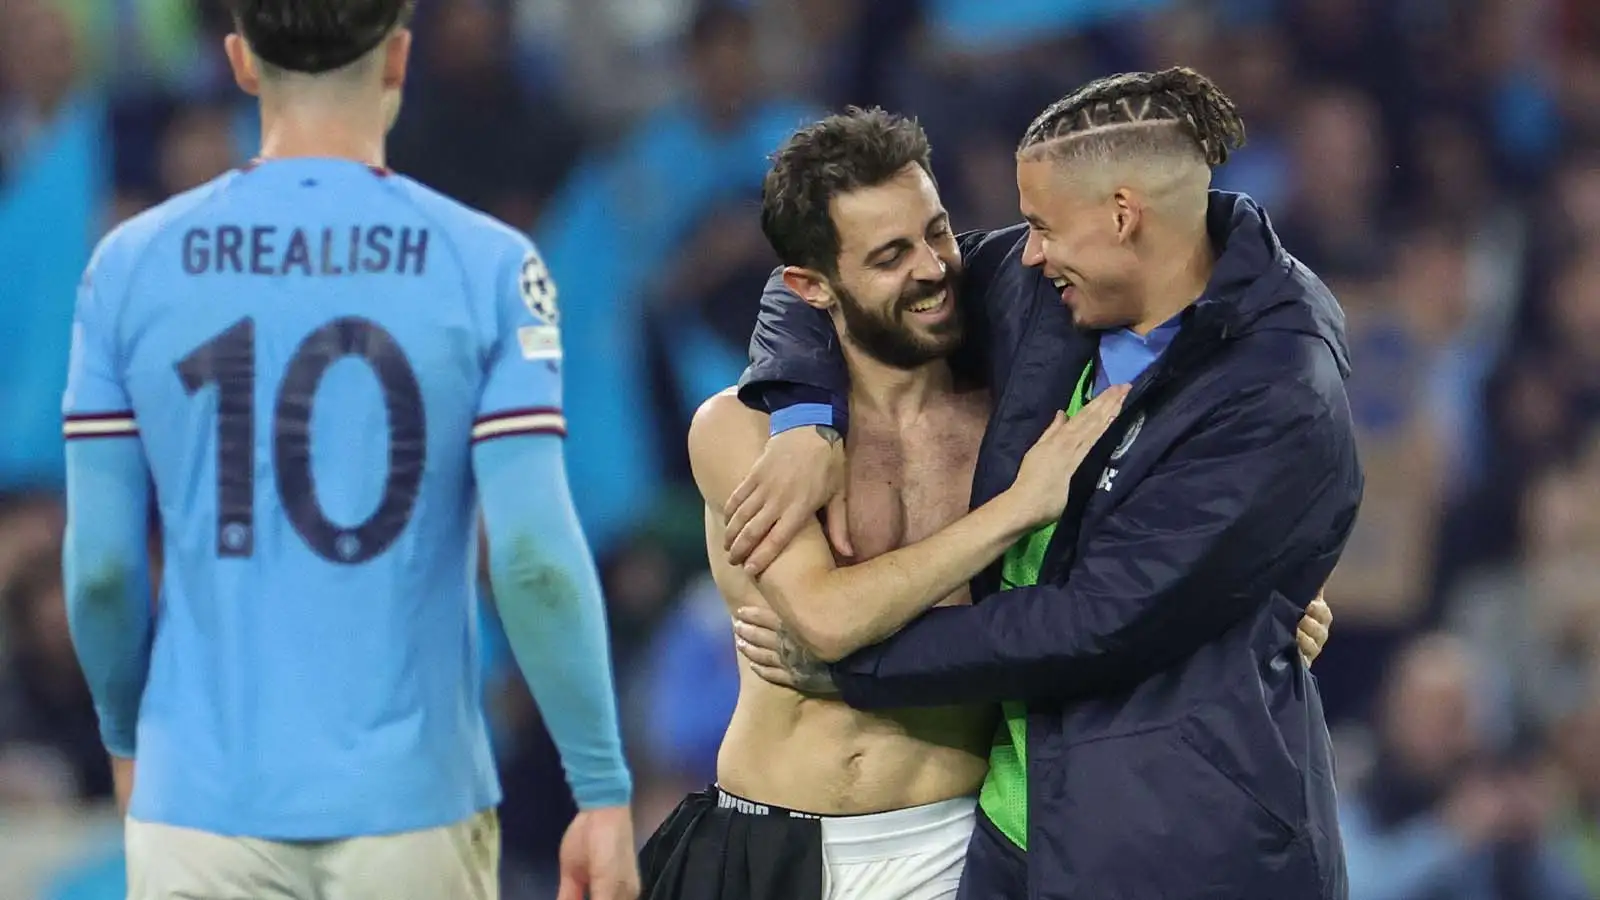 Bernardo Silva #20 of Manchester City and Kalvin Phillips #4 of Manchester City embrace after the UEFA Champions League Semi-Final Second Leg Manchester City vs Real Madrid at Etihad Stadium, Manchester, United Kingdom, 17th May 2023